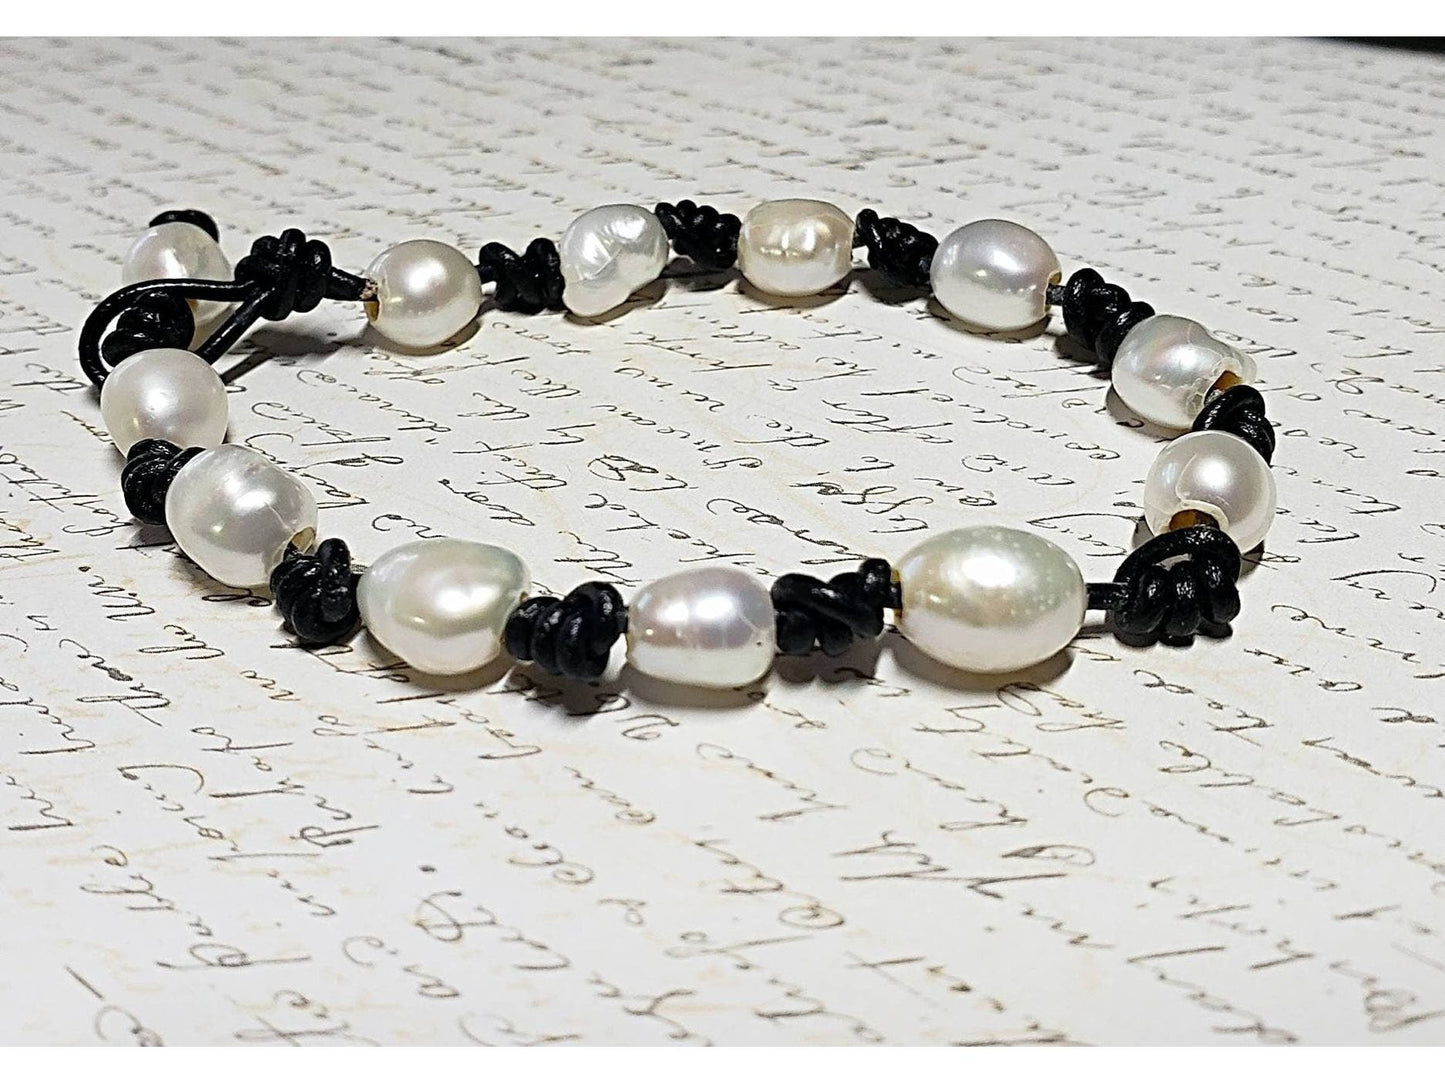 White Pearls knotted on Black leather bracelet.